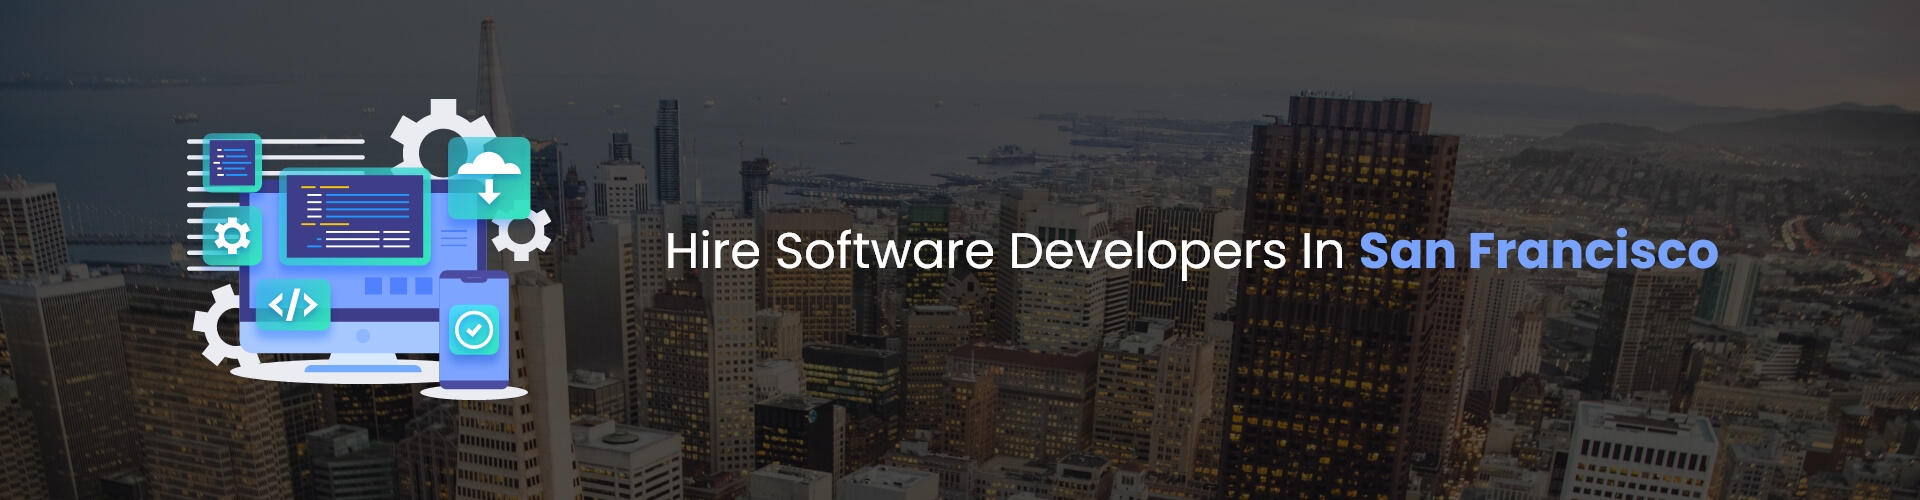 hire software developers in san francisco